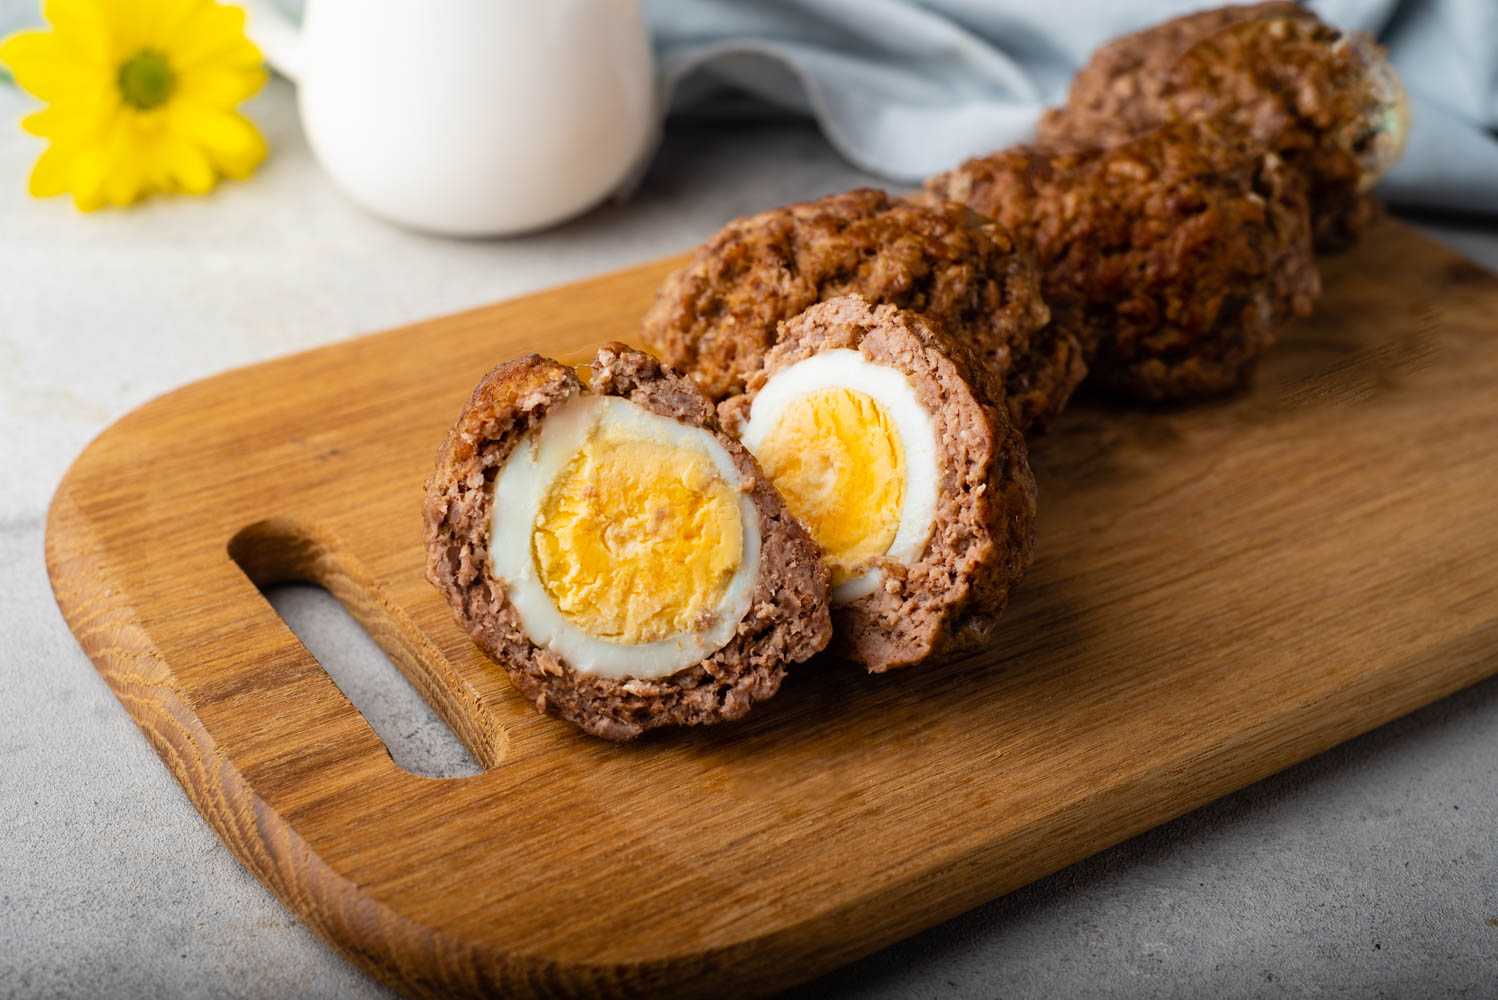 Ready to eat scotch eggs coated with sausage crust on a wooden cutter